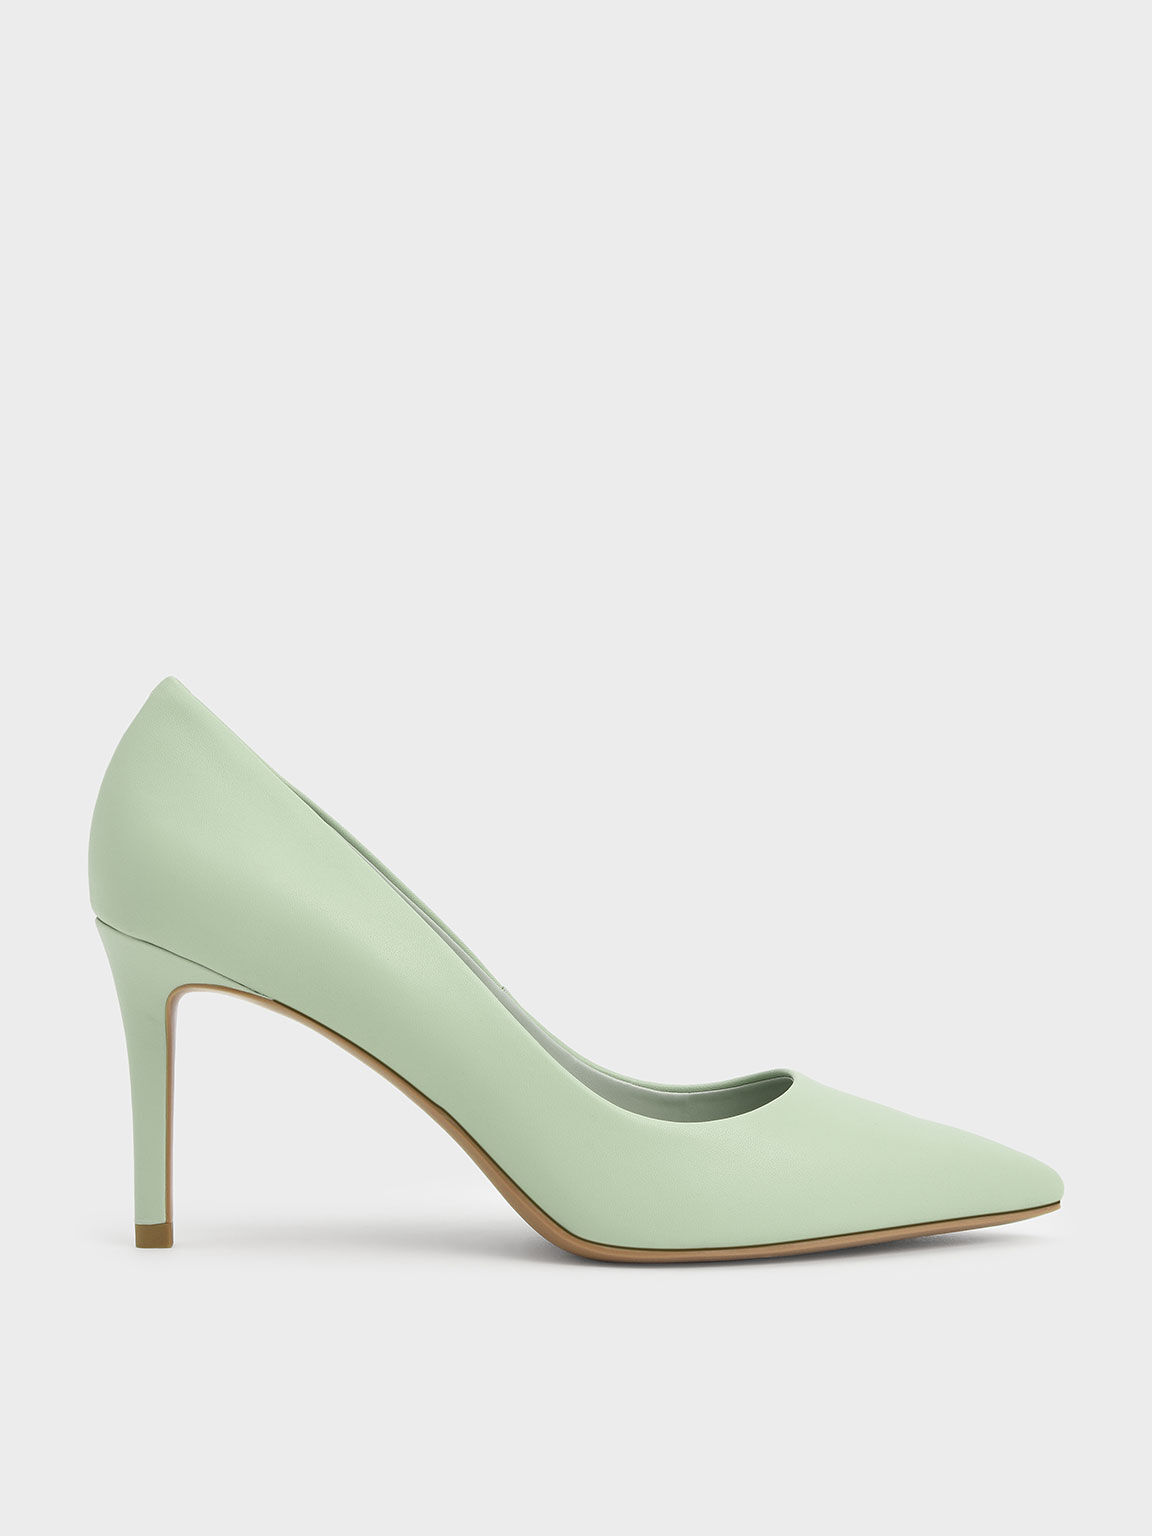 Pointed Toe Stiletto Pumps, Sage Green, hi-res